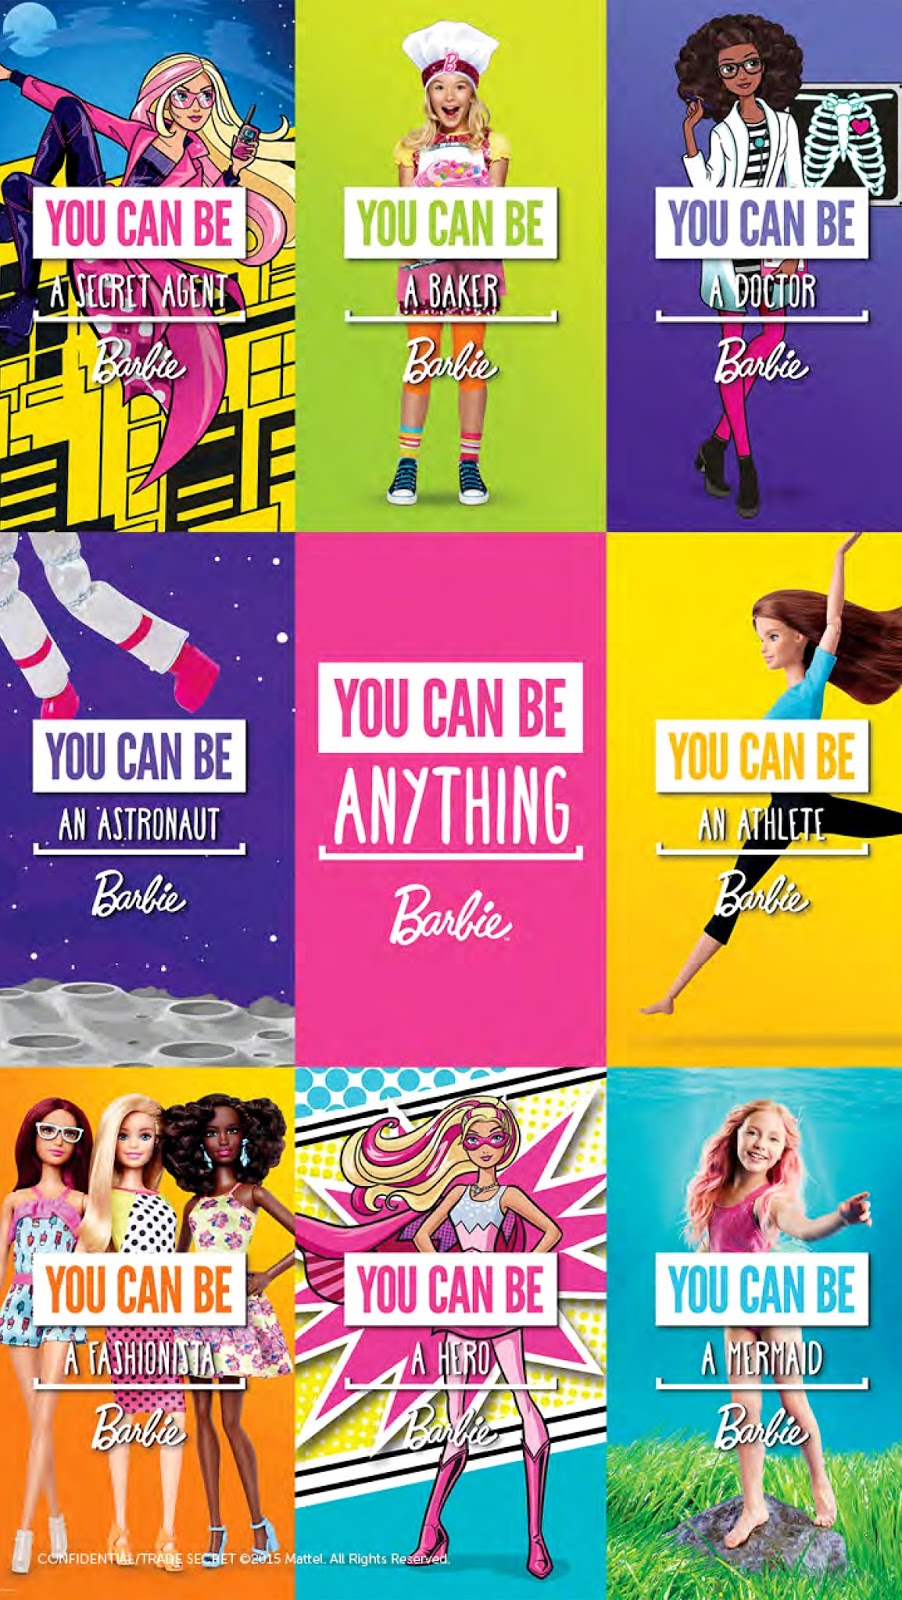 Shopgirl Jen: BARBIE'S YOU CAN BE ANYTHING CAMPAIGN